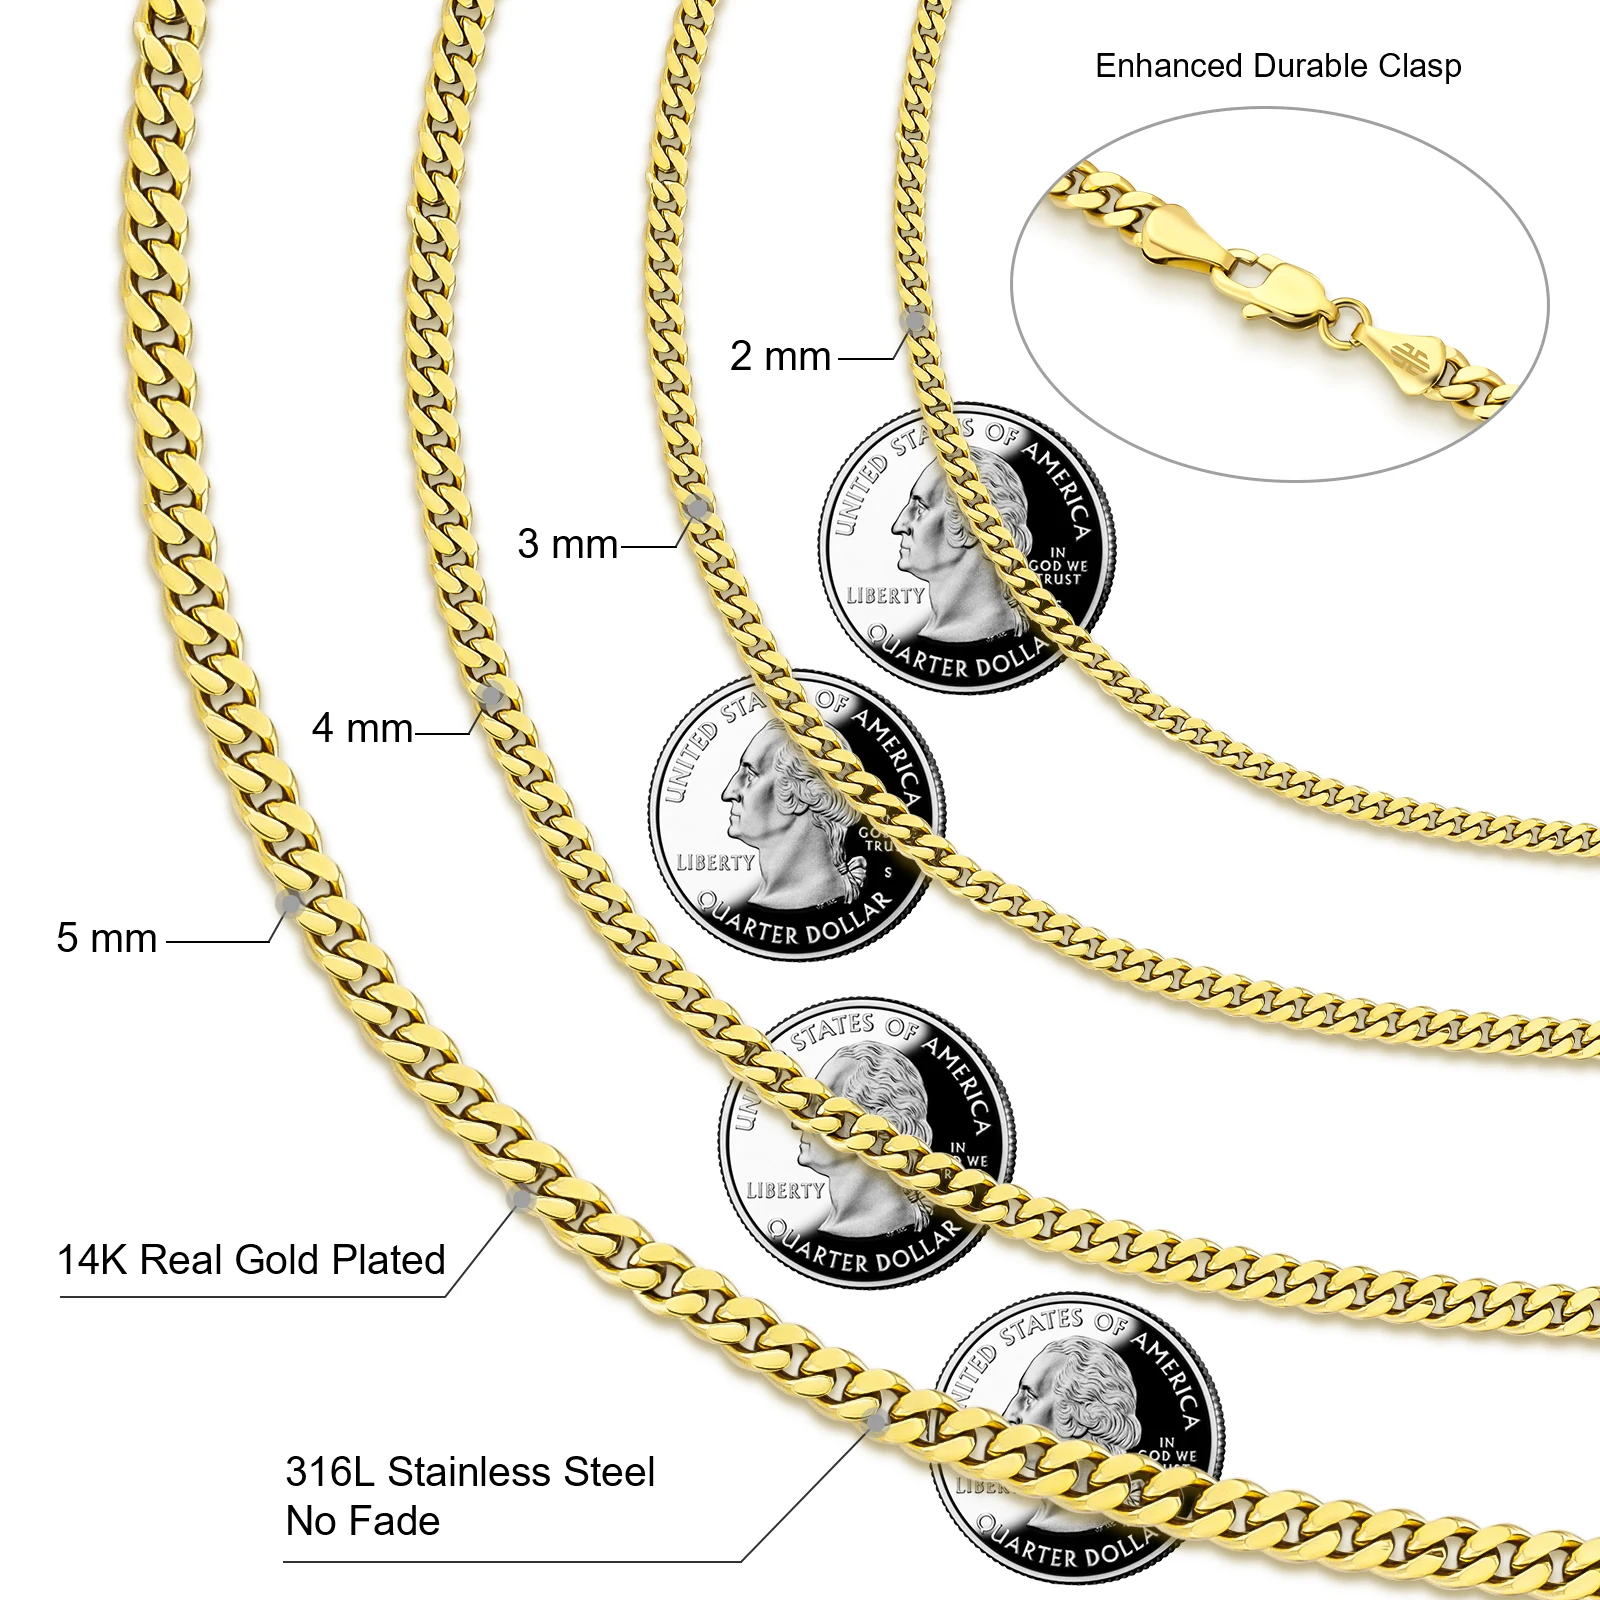 Promotion Price 3mm 5mm Gold Cuban Chain Mens Women Silver Stainless ...